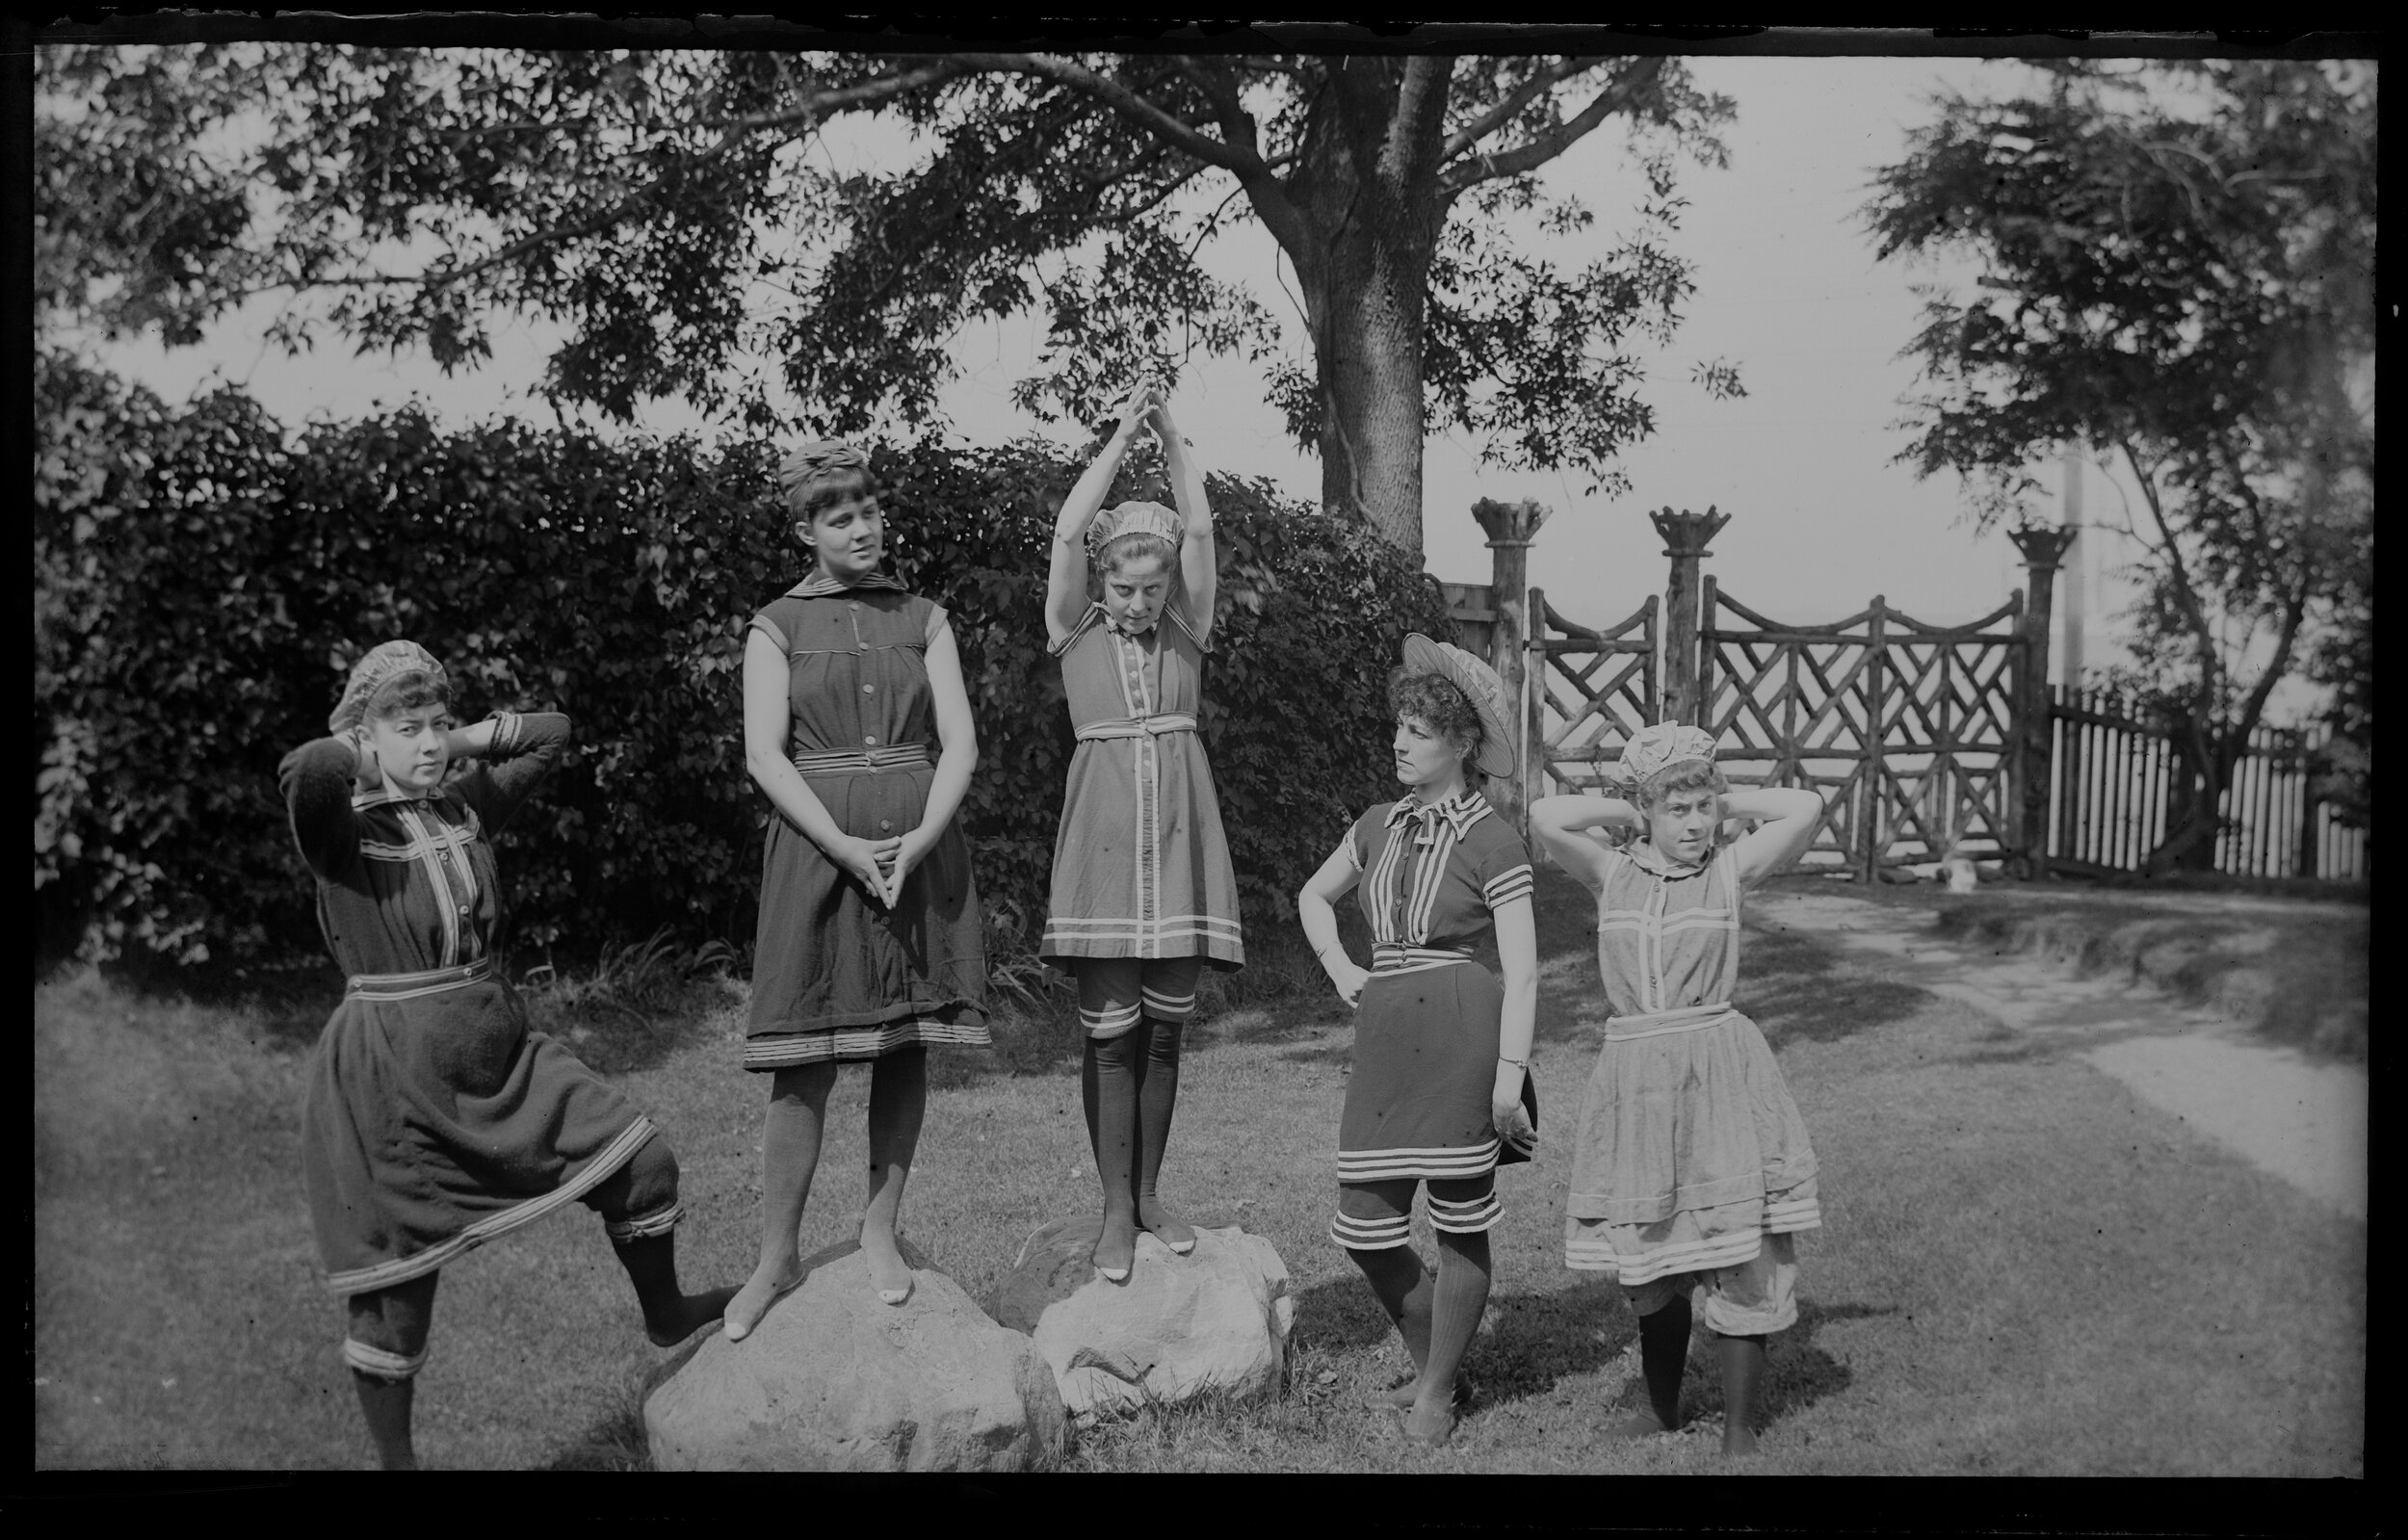  Alice Austen (left) and friends in bathing suits at Clear Comfort, Rosebank, Staten Island. Photo by Alice Austen, September 17, 1885. 